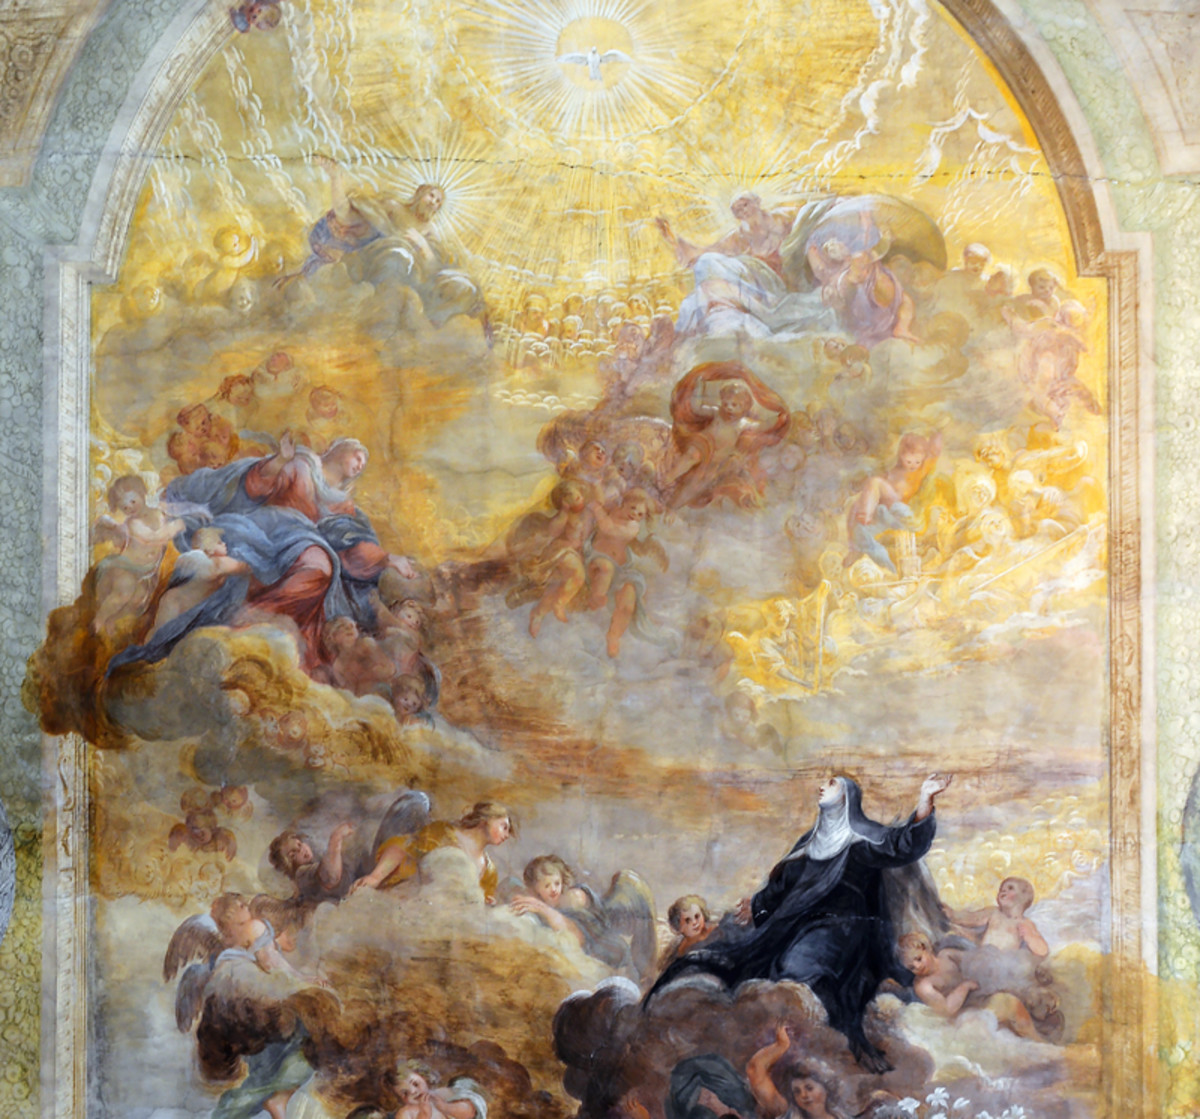 St. Mary Magdalene de Pazzi enters heaven; ceiling painting at the Church of Santa Maria Maddalena dei Pazzi, Florence